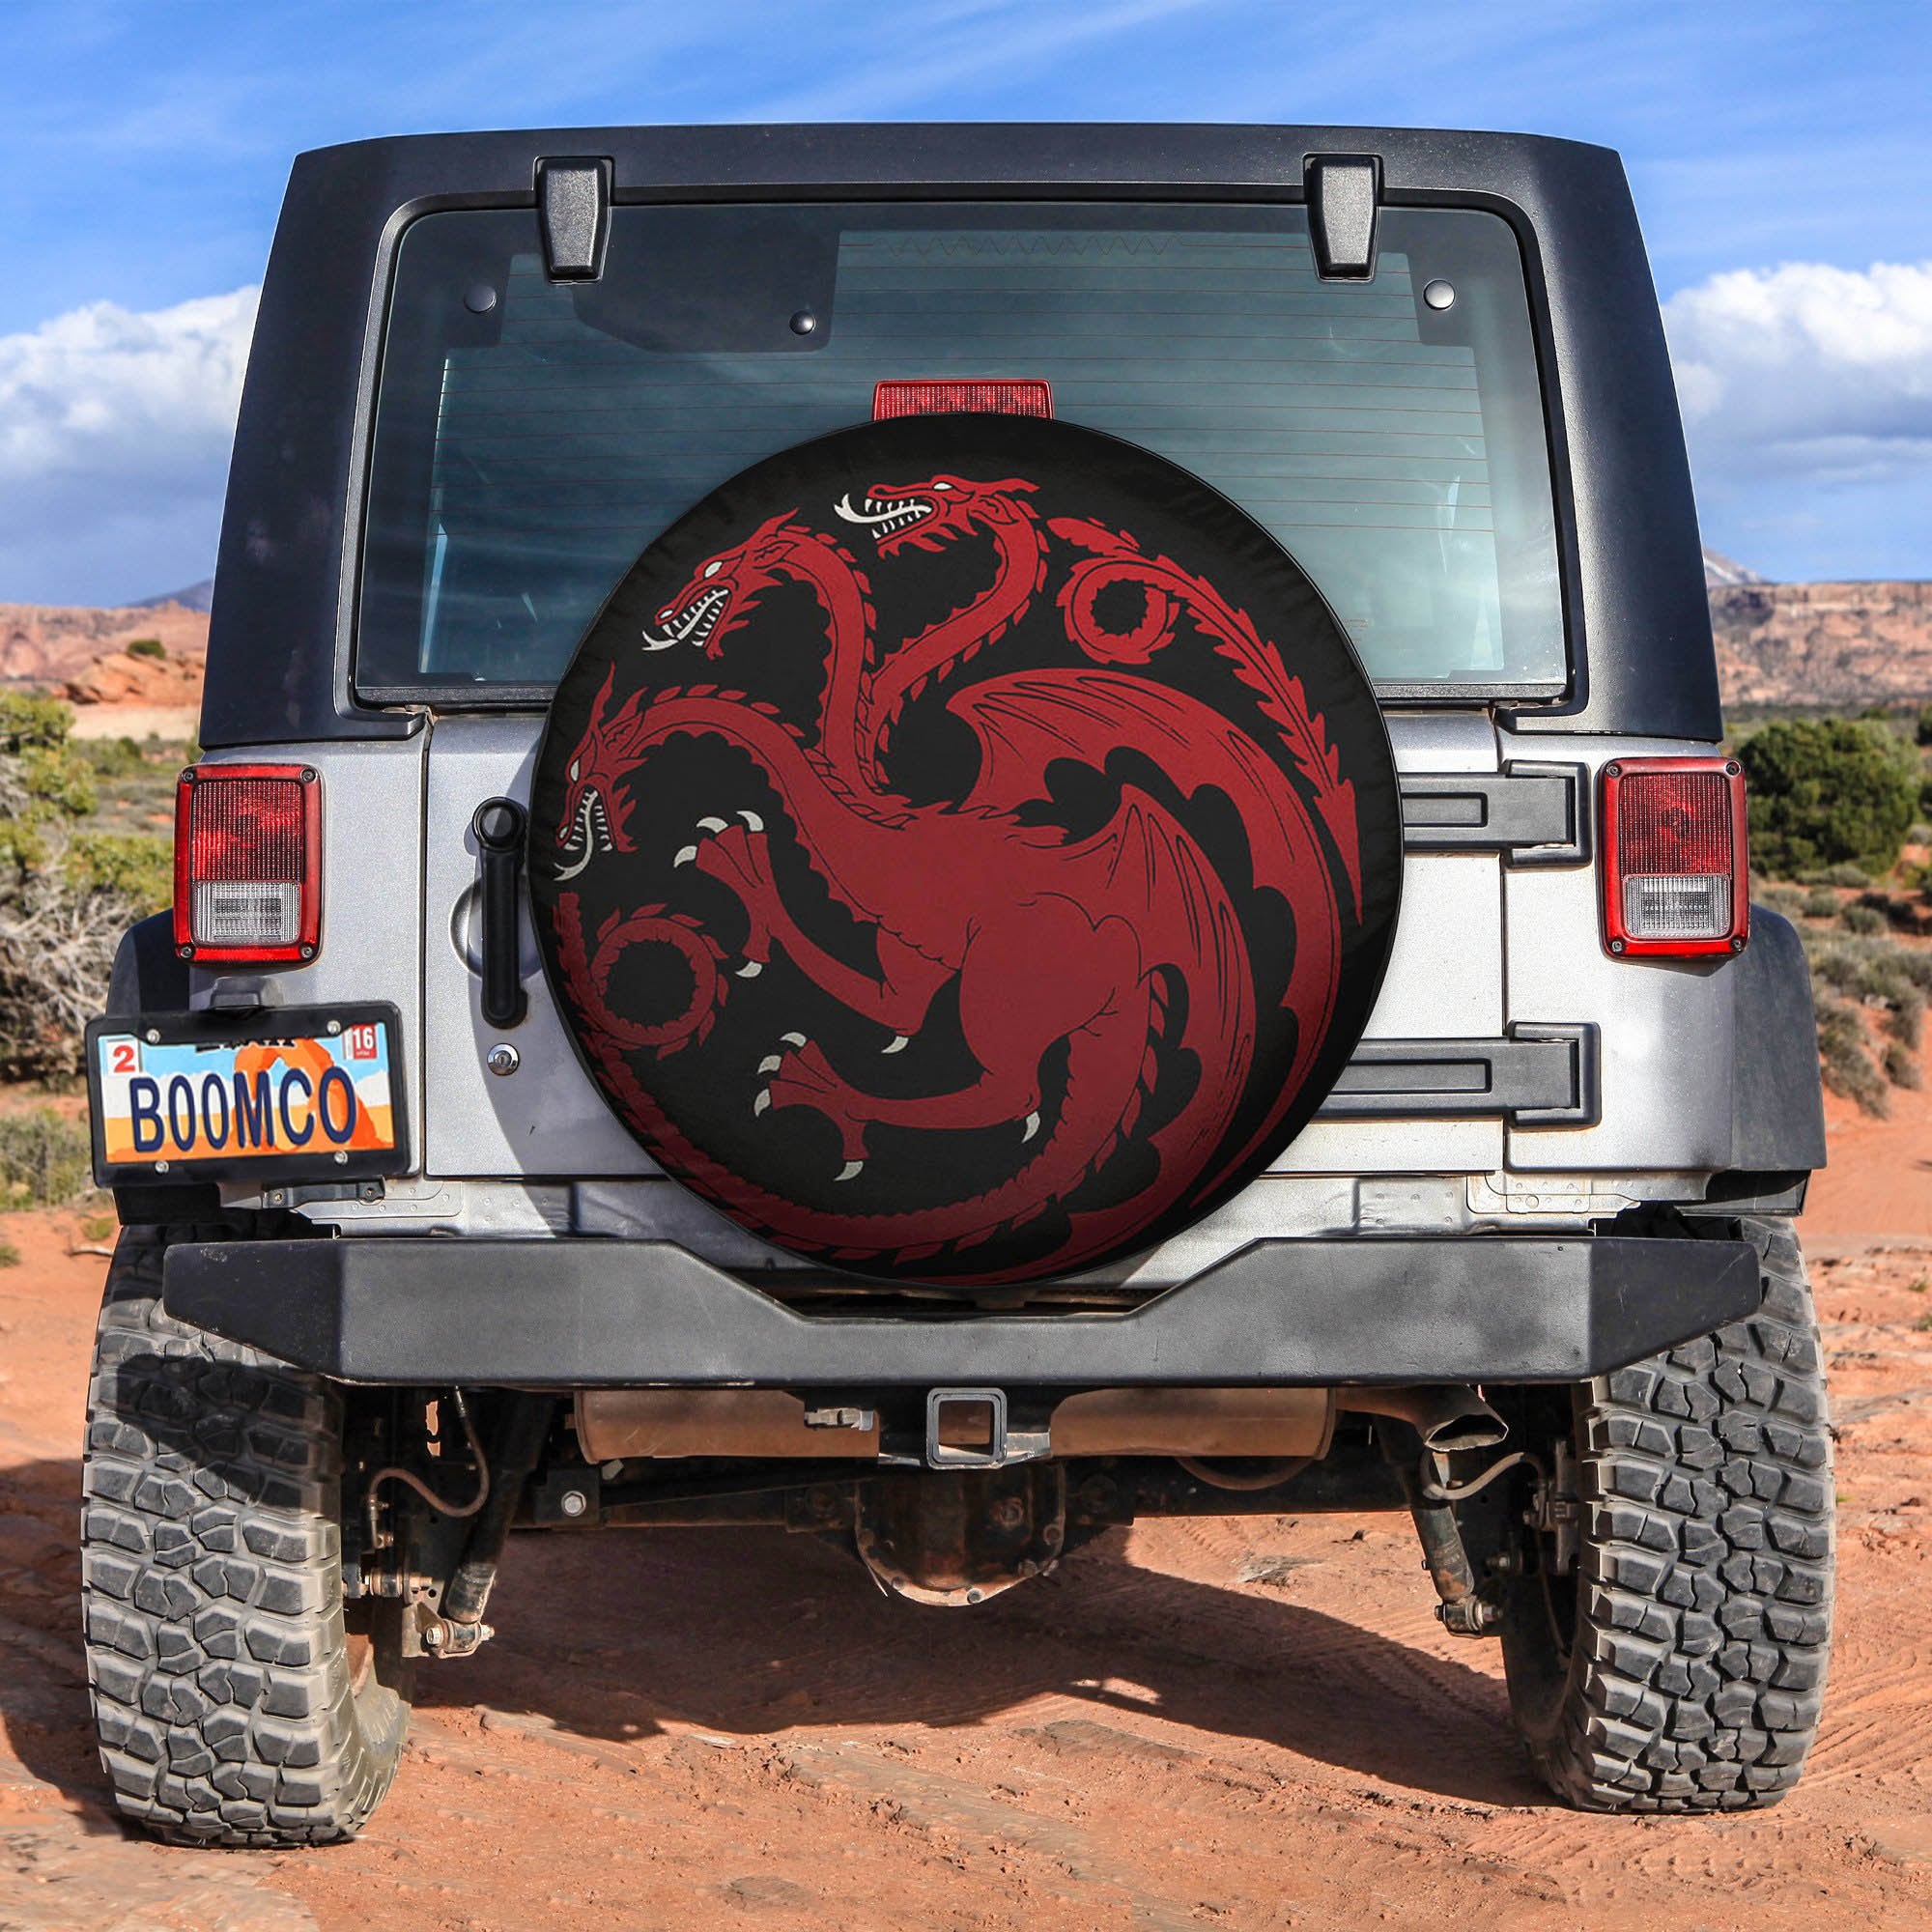 Tageryen Dragon Spare Tire Covers Gift For Campers Nearkii